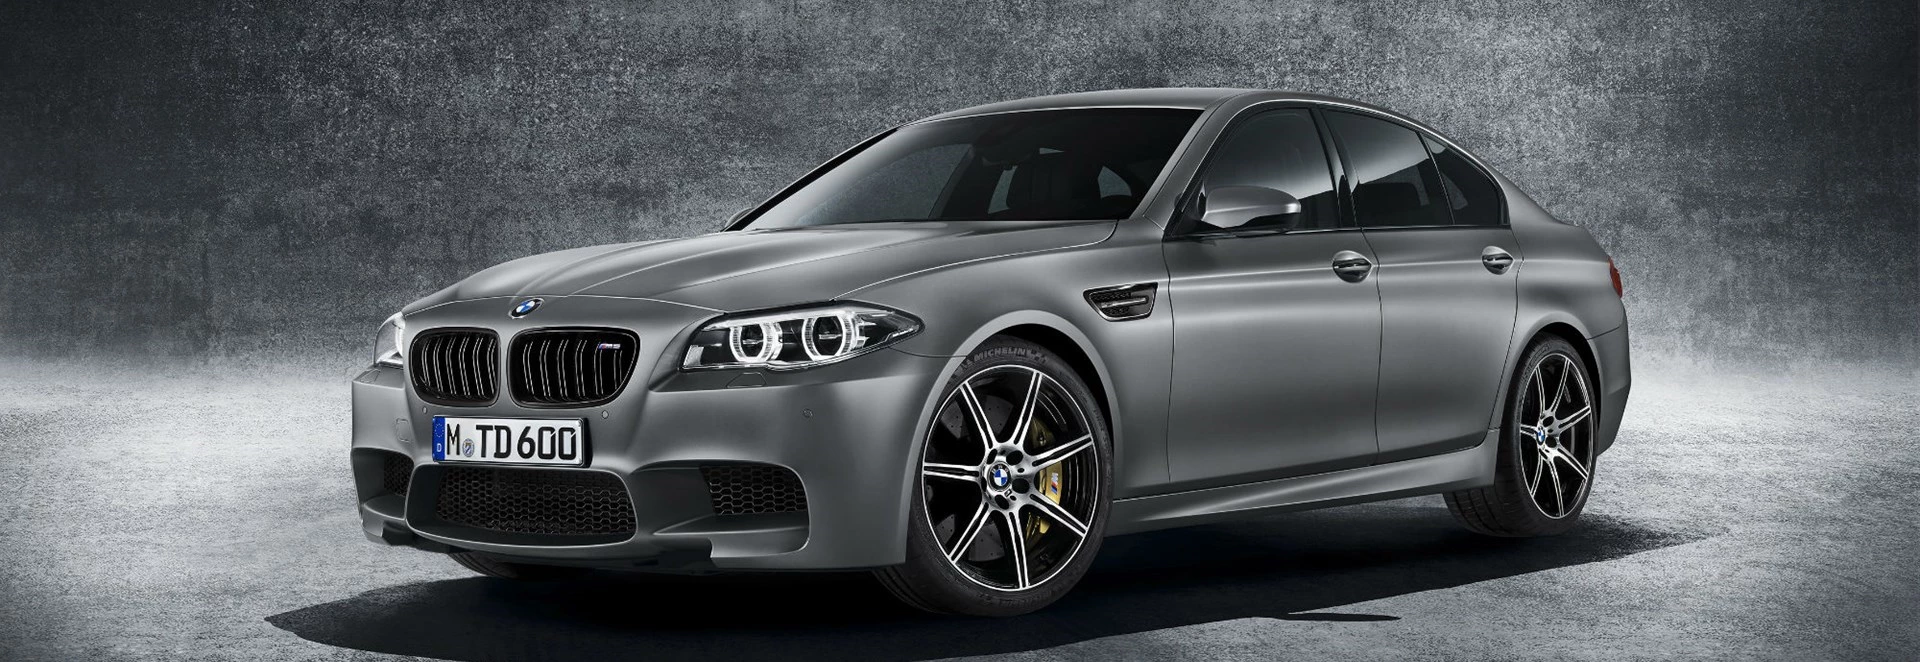 The 2017 BMW M5 will have four-wheel drive and up to 600bhp 